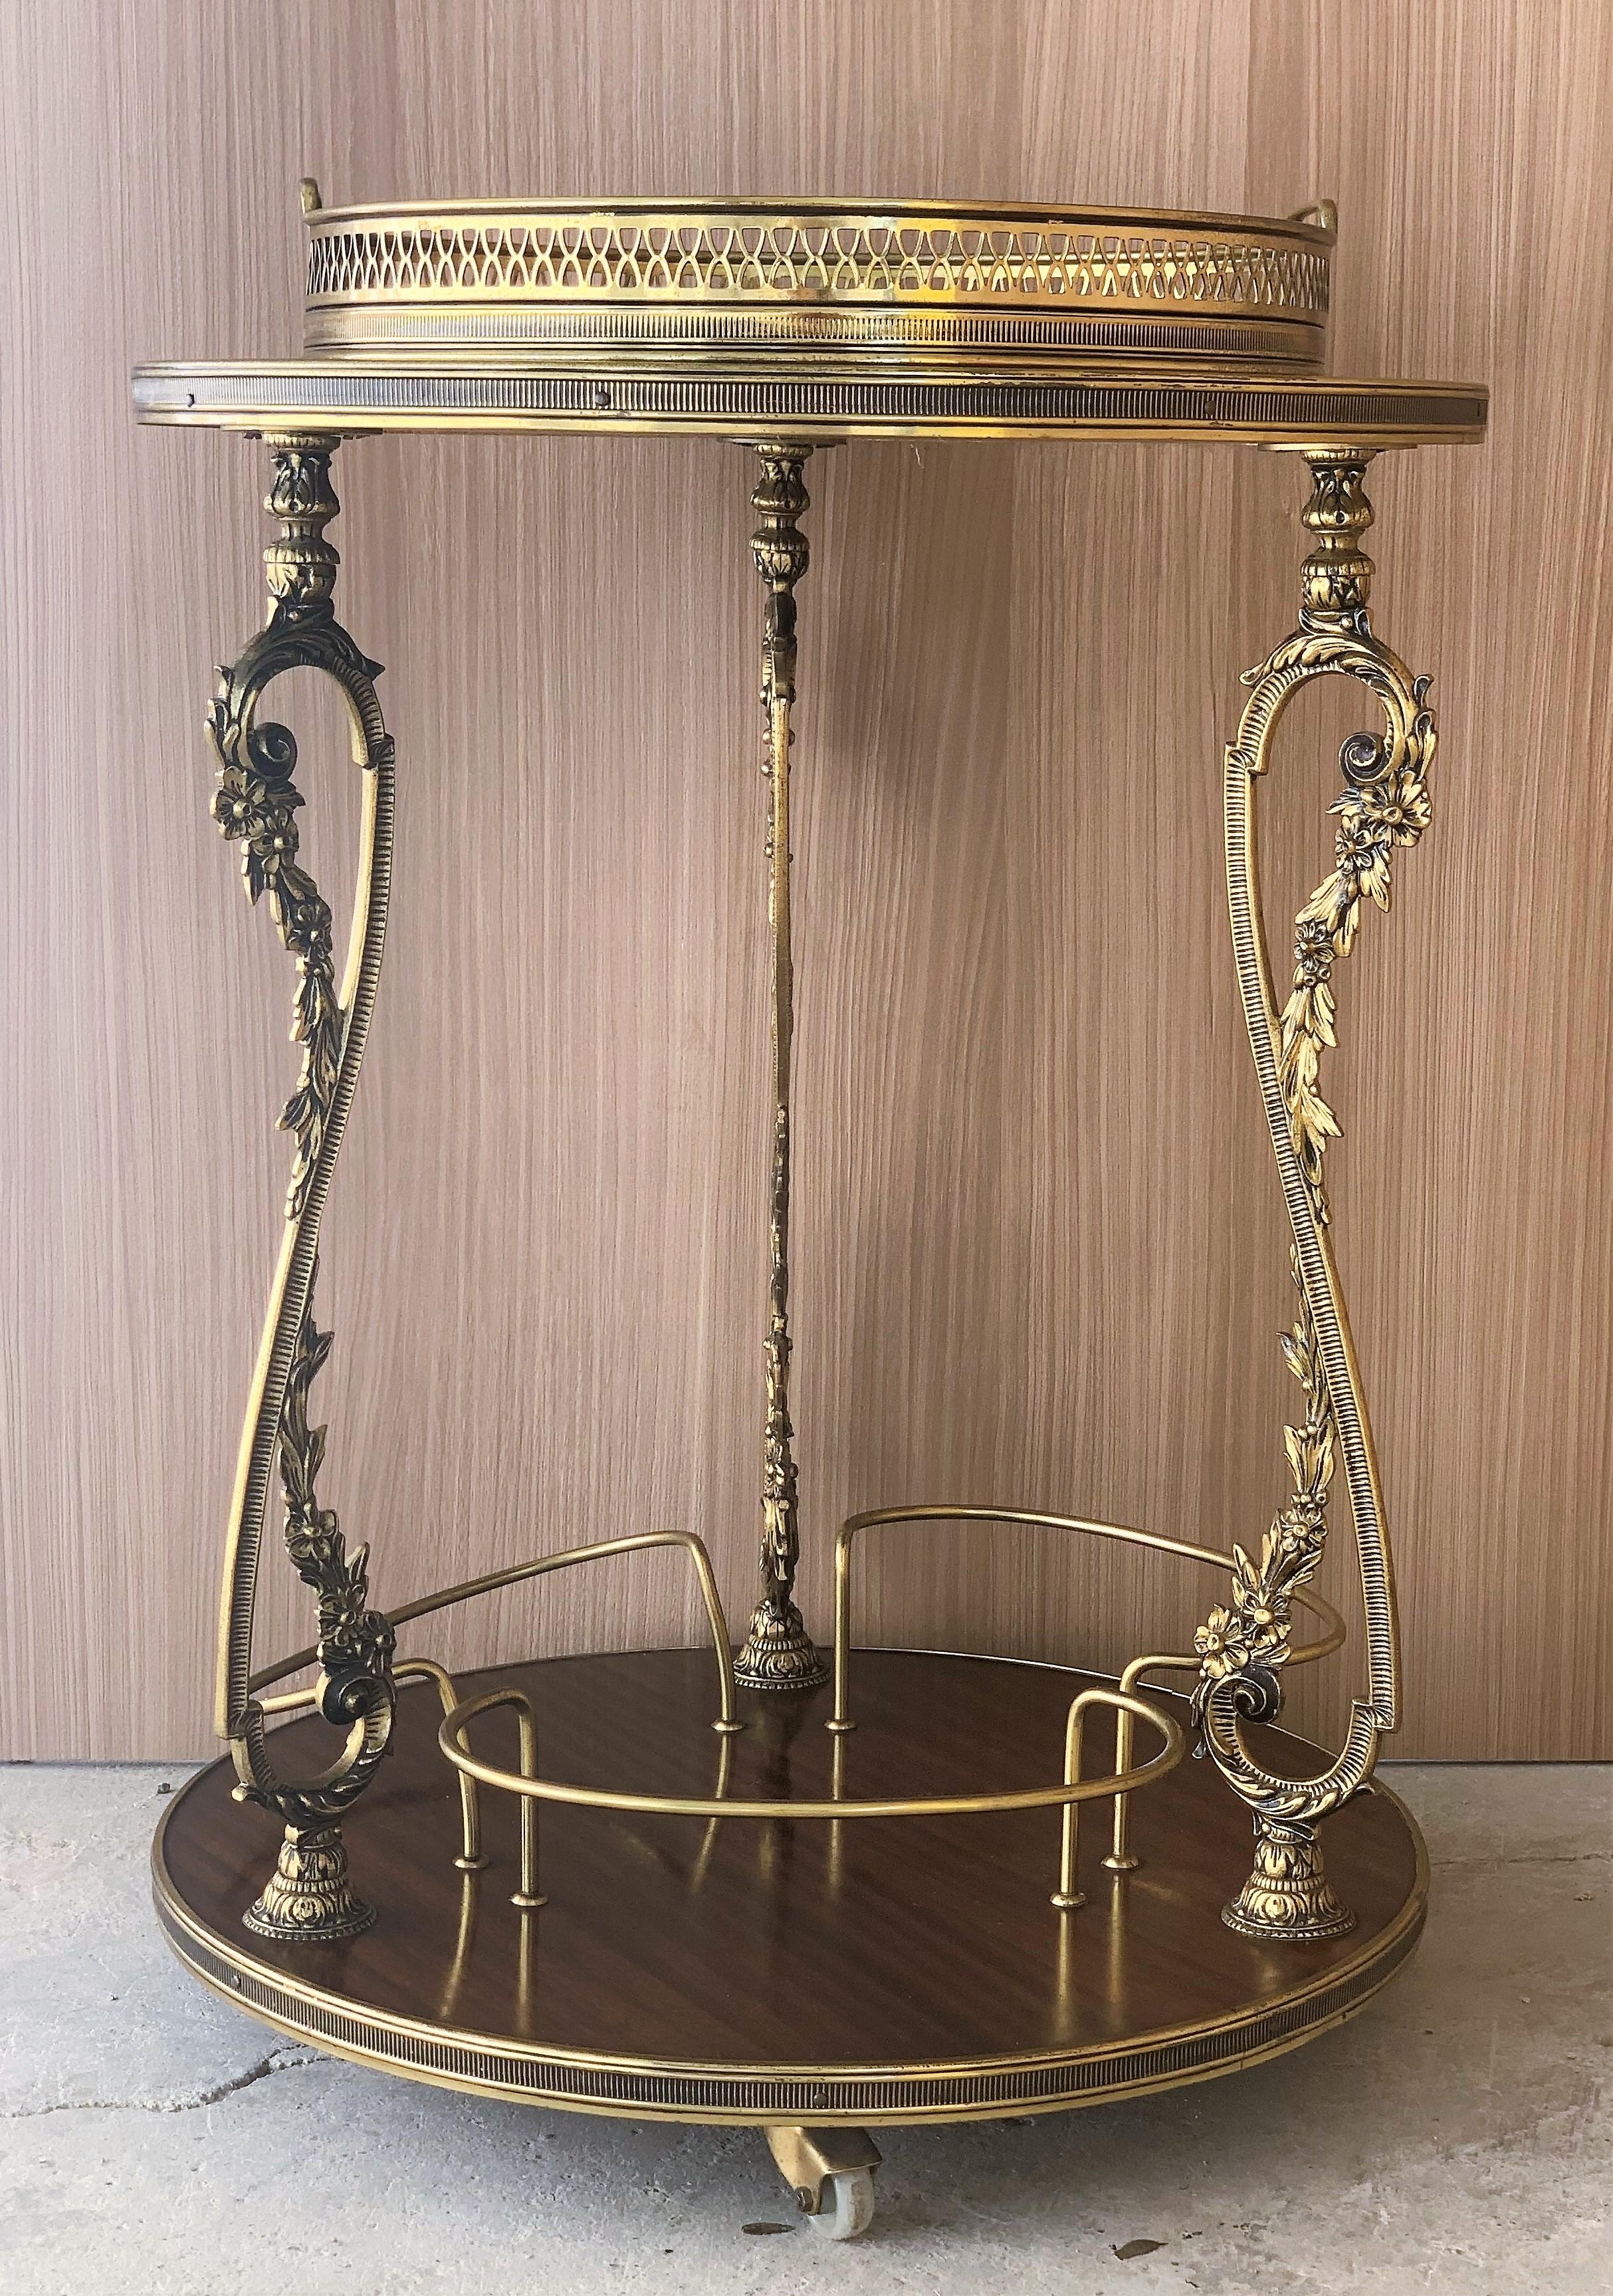 Elegant round bar cart made of bronze, mahogany veneer and glass in 1930s, France, attributed to Maison Baguès. The cart features 2 mahogany veneer tops with brass galleried edges, the serving tray in brass and clear glass is removable.